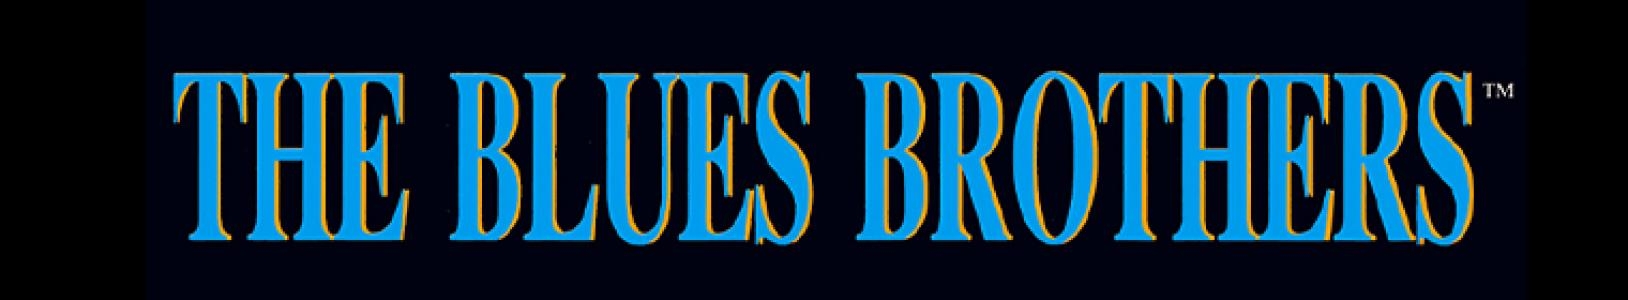 The Blues Brothers banner